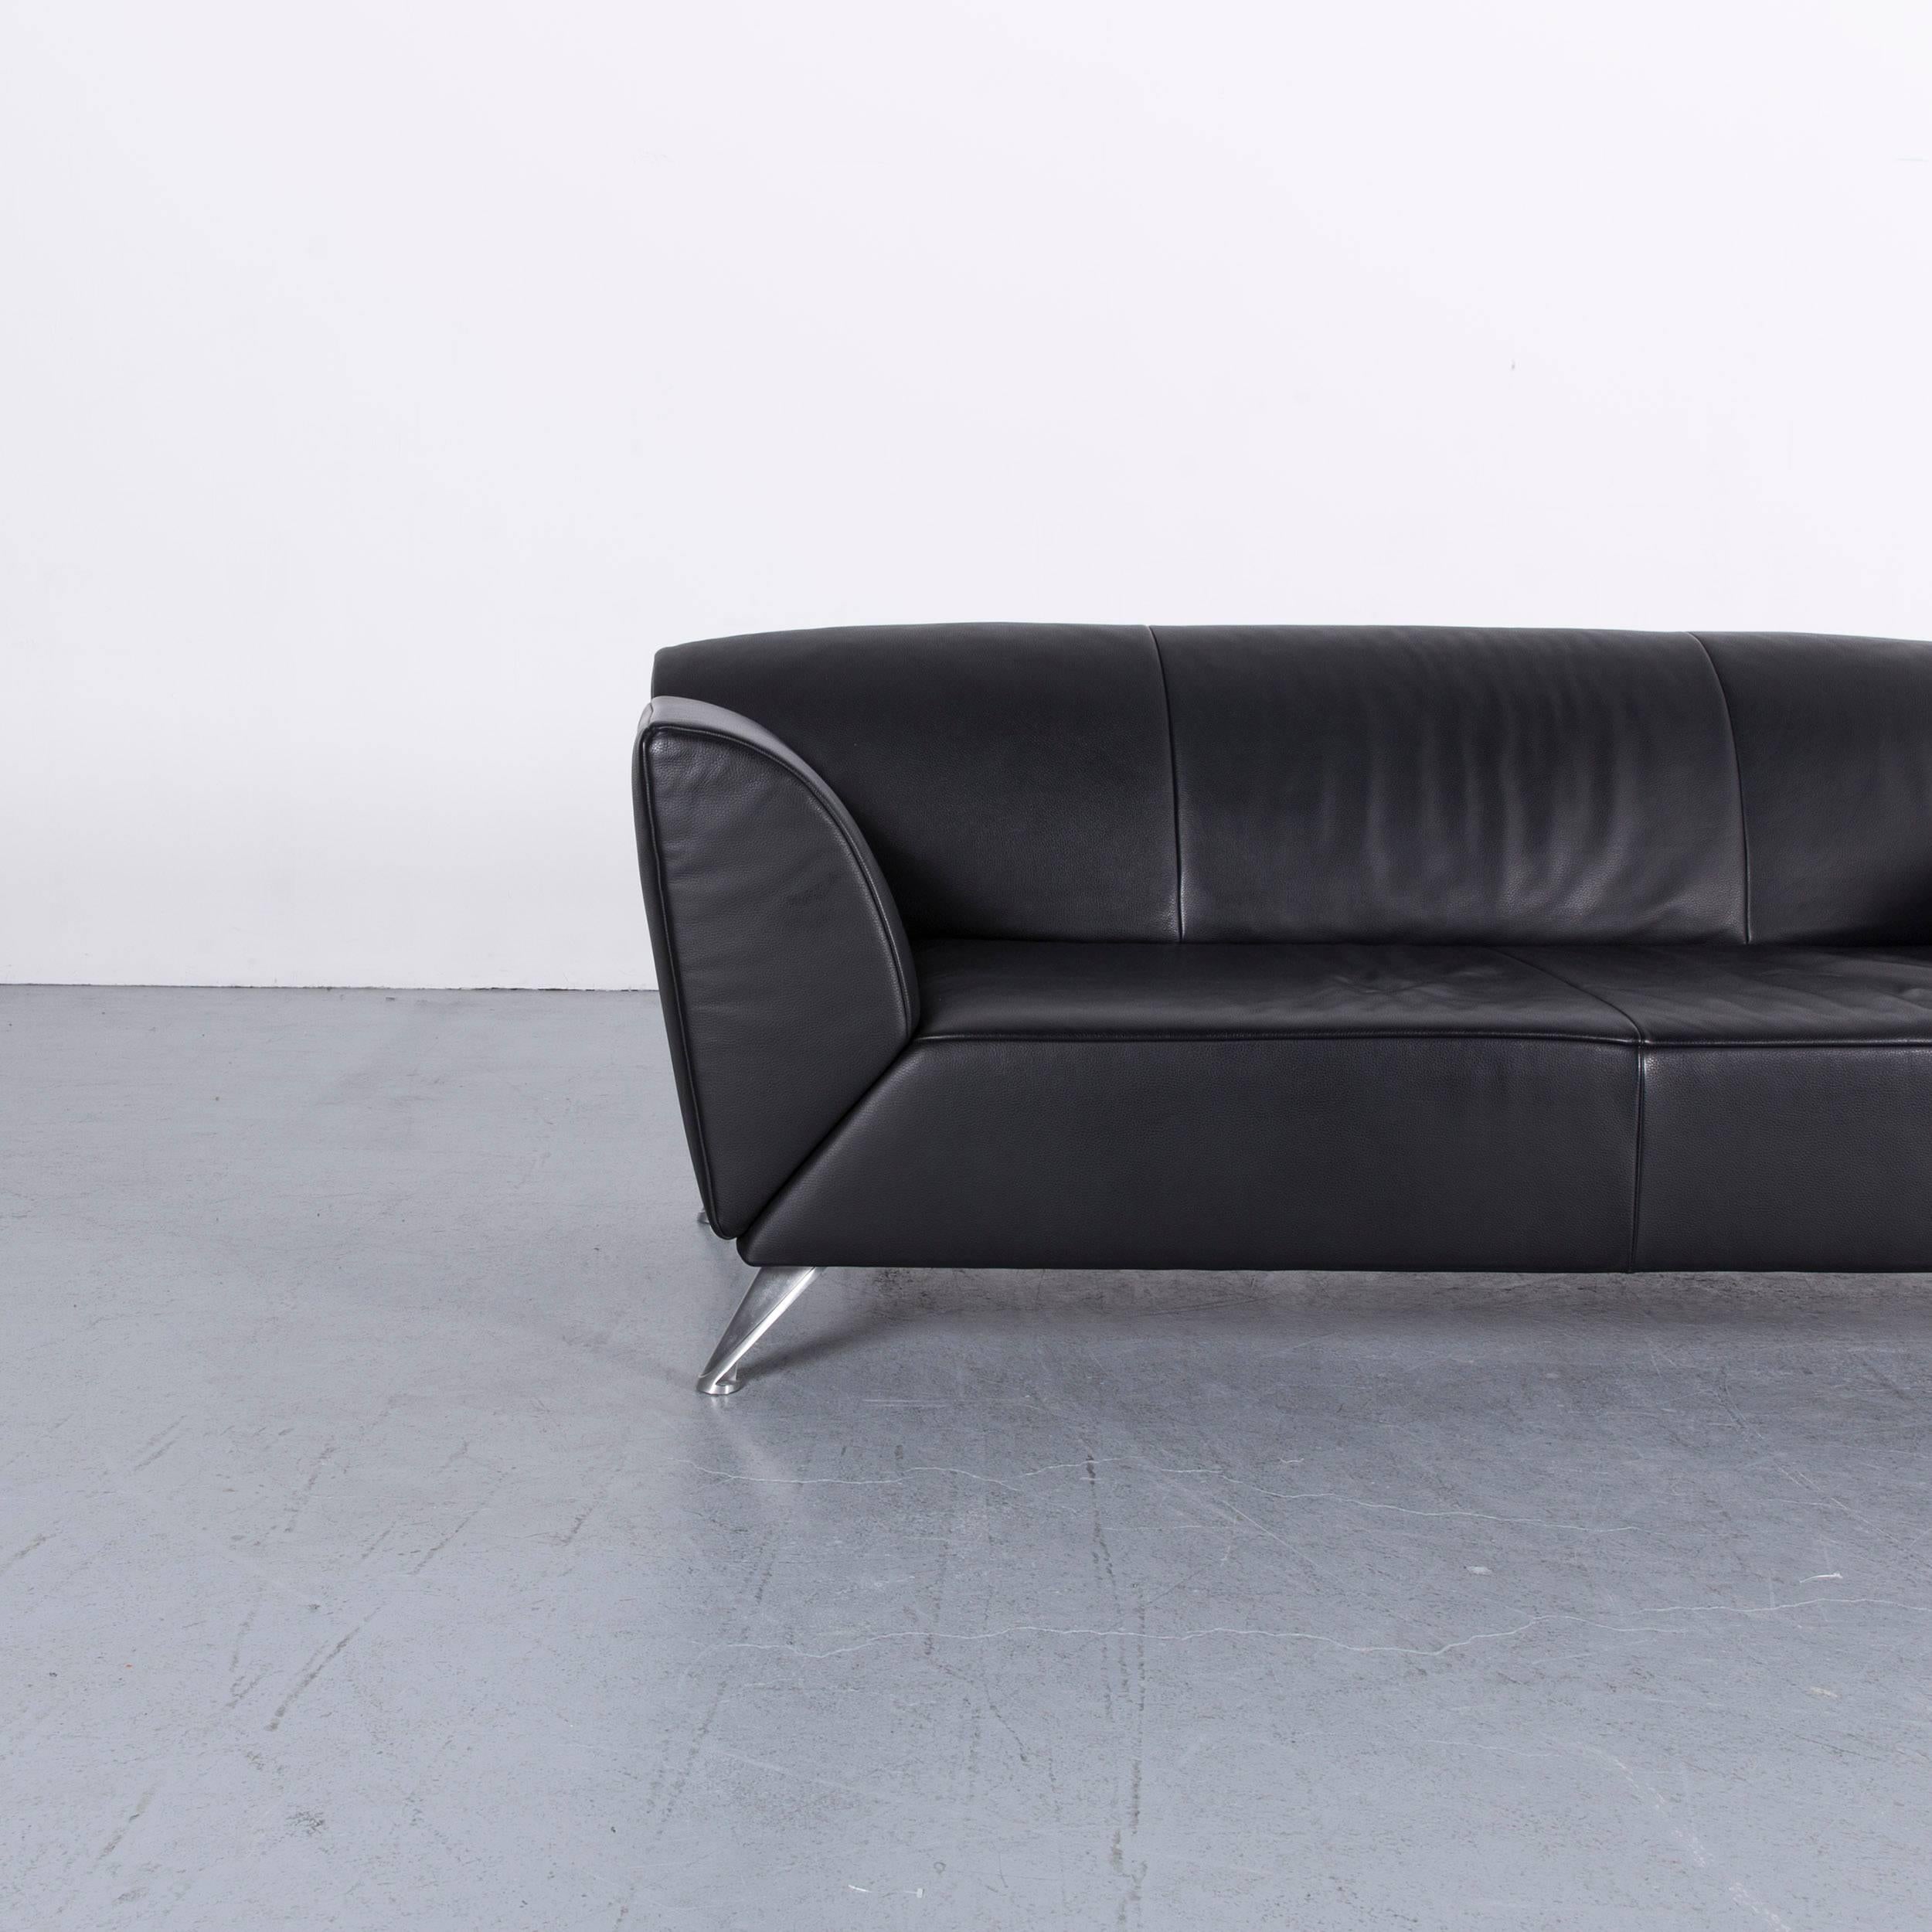 We bring to you an Jori JR 9700 leather sofa black three-seat couch.